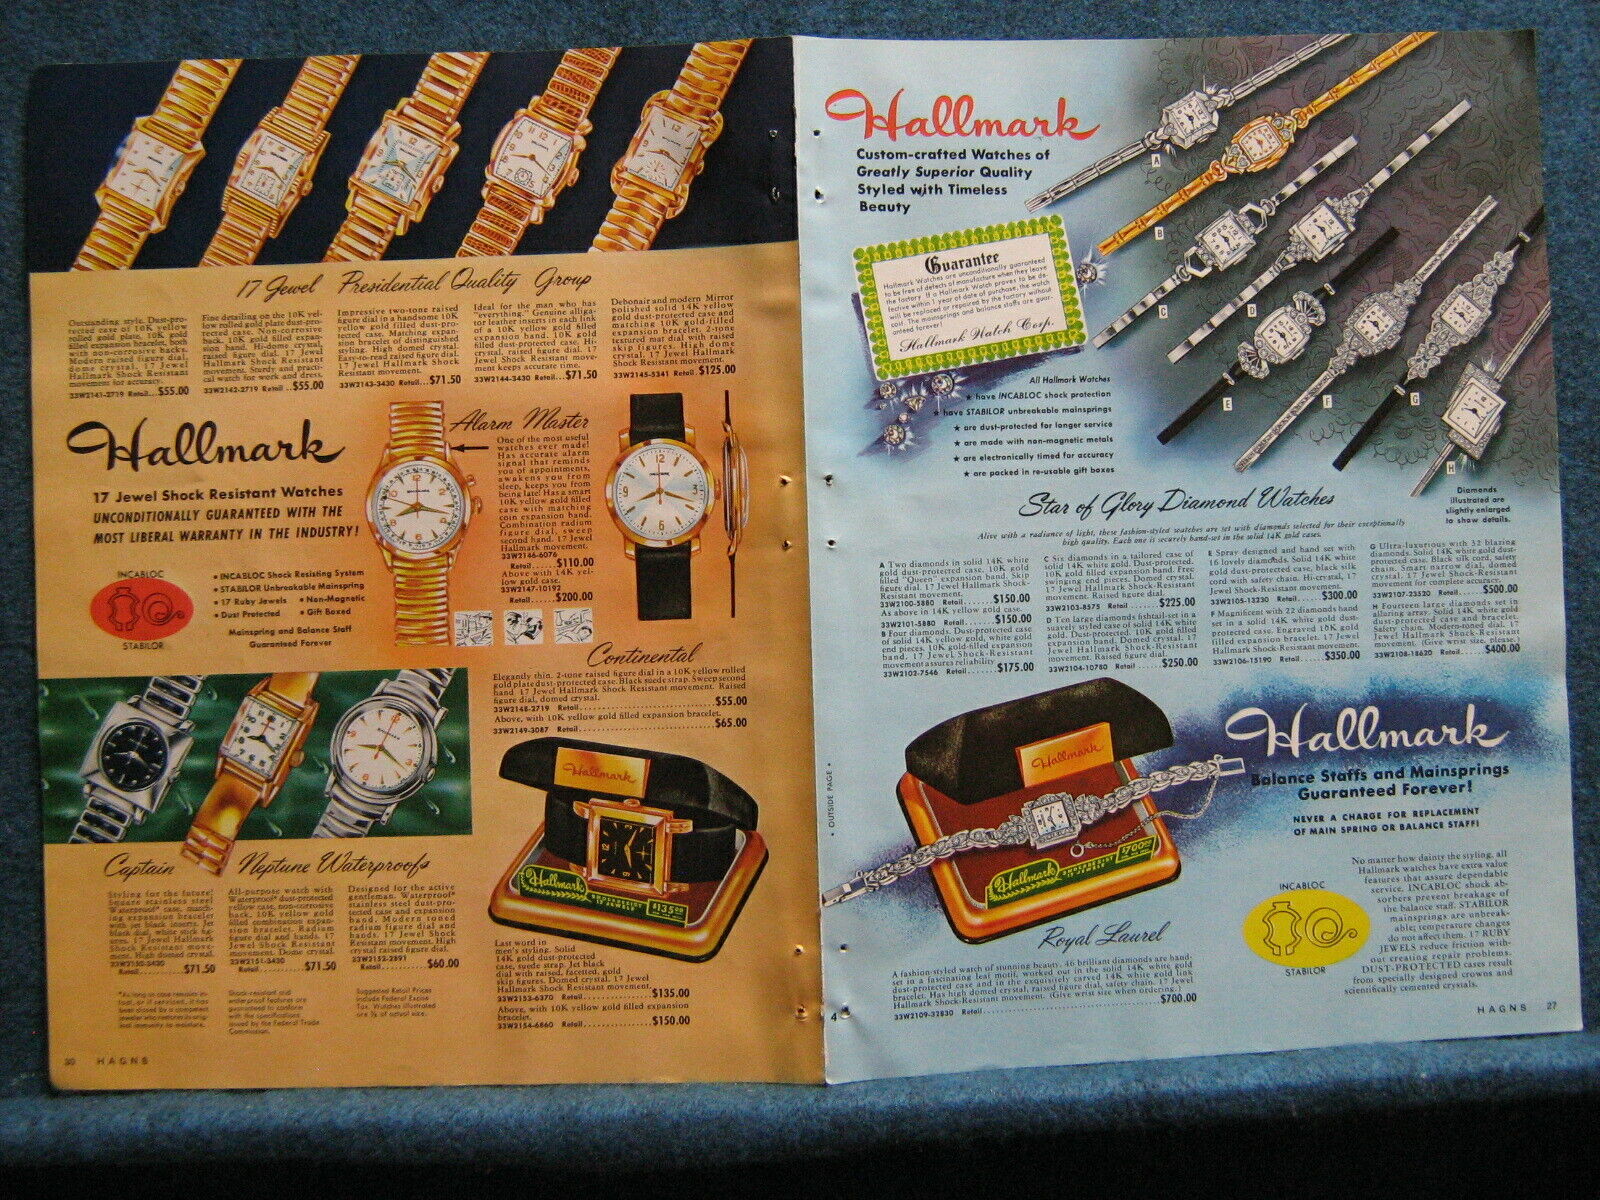 1955 Hallmark Wrist Watch 4 Pg Ad Print In Color - 38 Watches Shown- Catalog Pgs